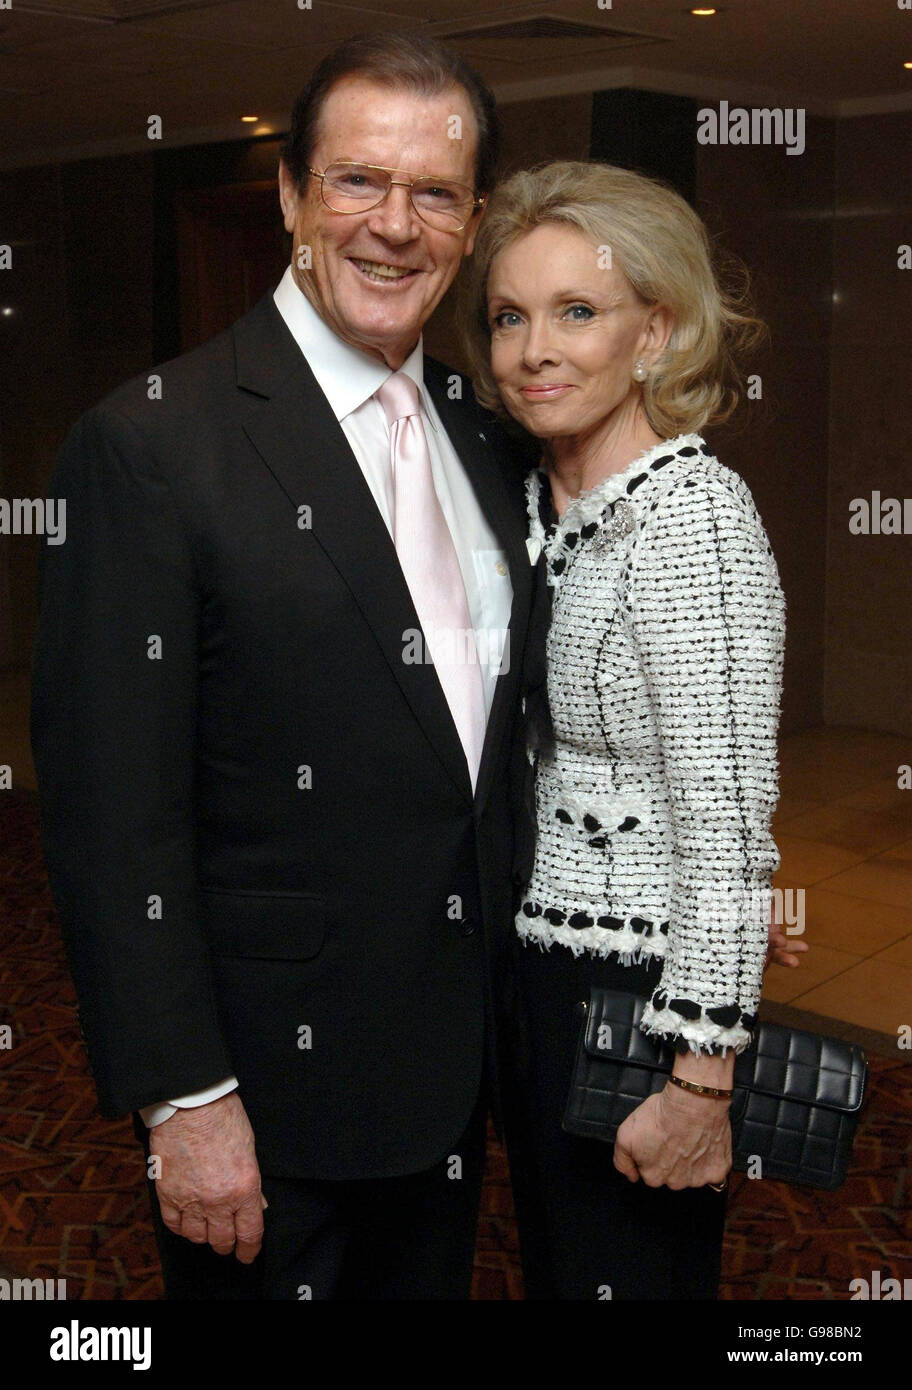 Sir Roger Moore and his wife Kiki arrive for the Sony Ericsson Empire Film Awards 2006, from the Hilton London Metropole, central London, Monday 13 March 2006. See PA story SHOWBIZ Empire. PRESS ASSOCIATION Photo. Photo credit should read: Ian West/PA Stock Photo